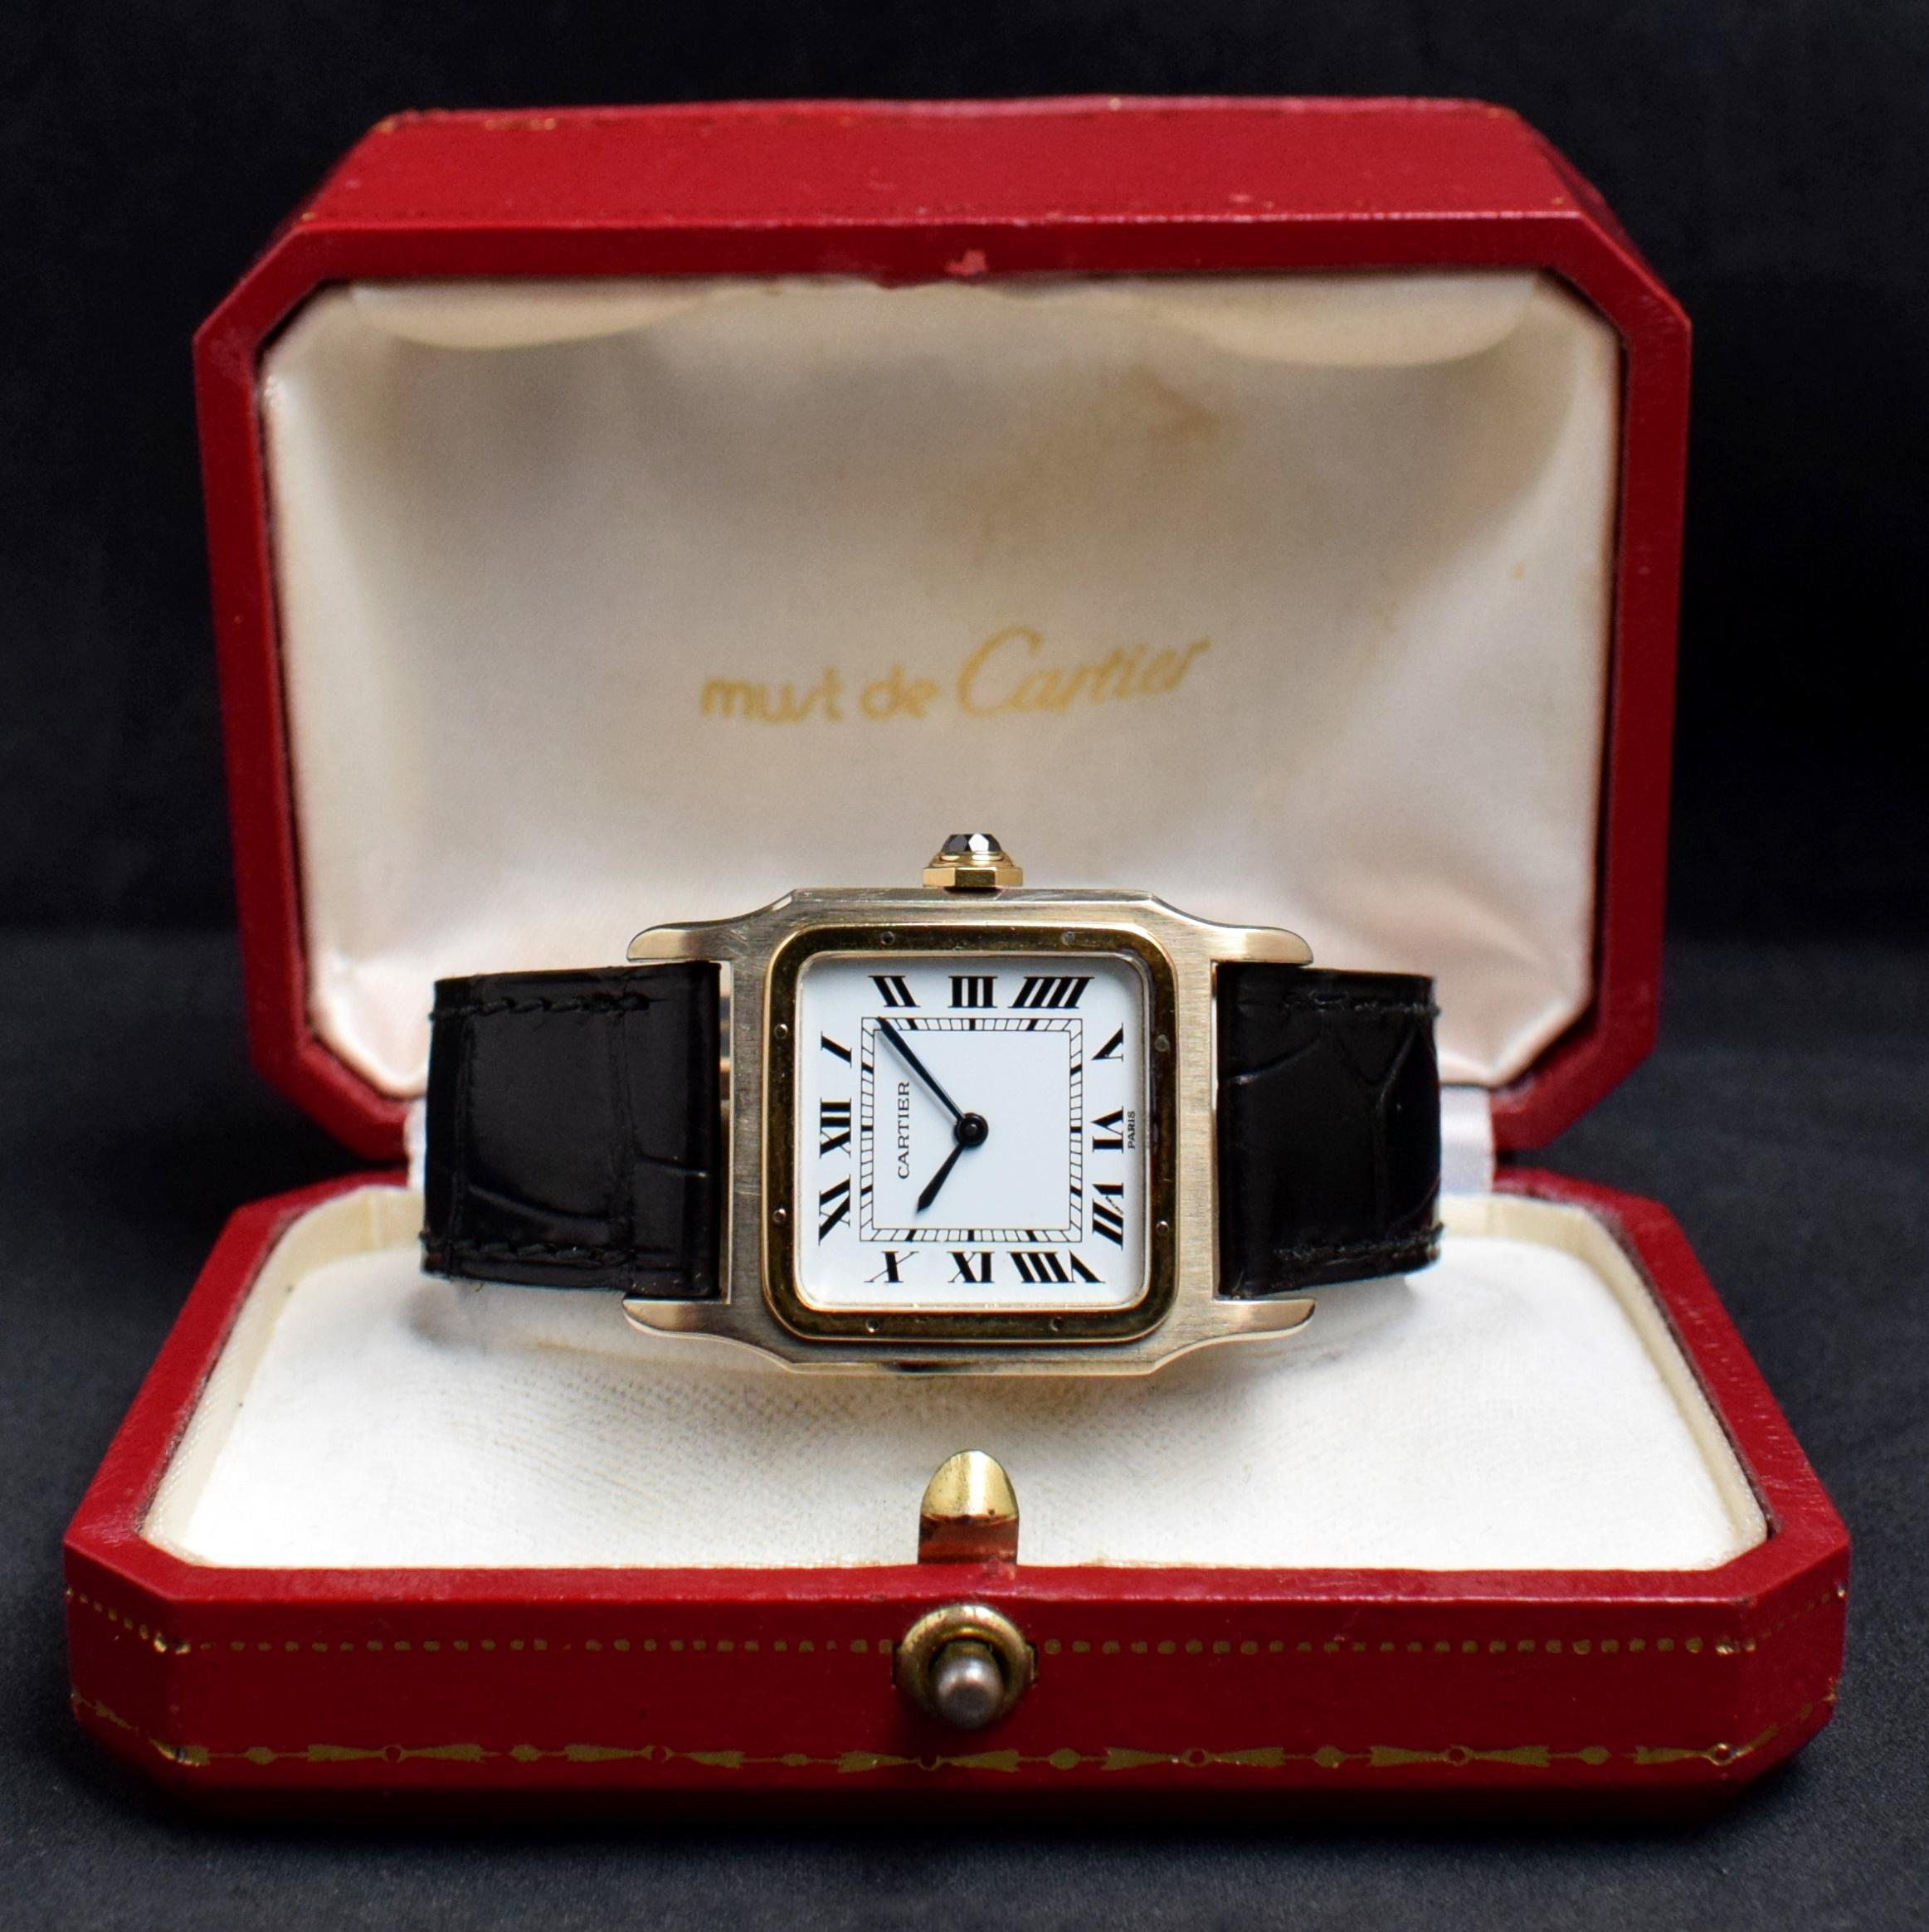 Brand: Vintage Cartier
Model: Santos Dumont
Year: 1980’s
Movement: Manual Wind
Serial number: 78xxxxxxx
Reference: C03225
Cartier’s one the most significant model, “The Santos Dumont” is literally the grandfather of the Cartier watch collection.